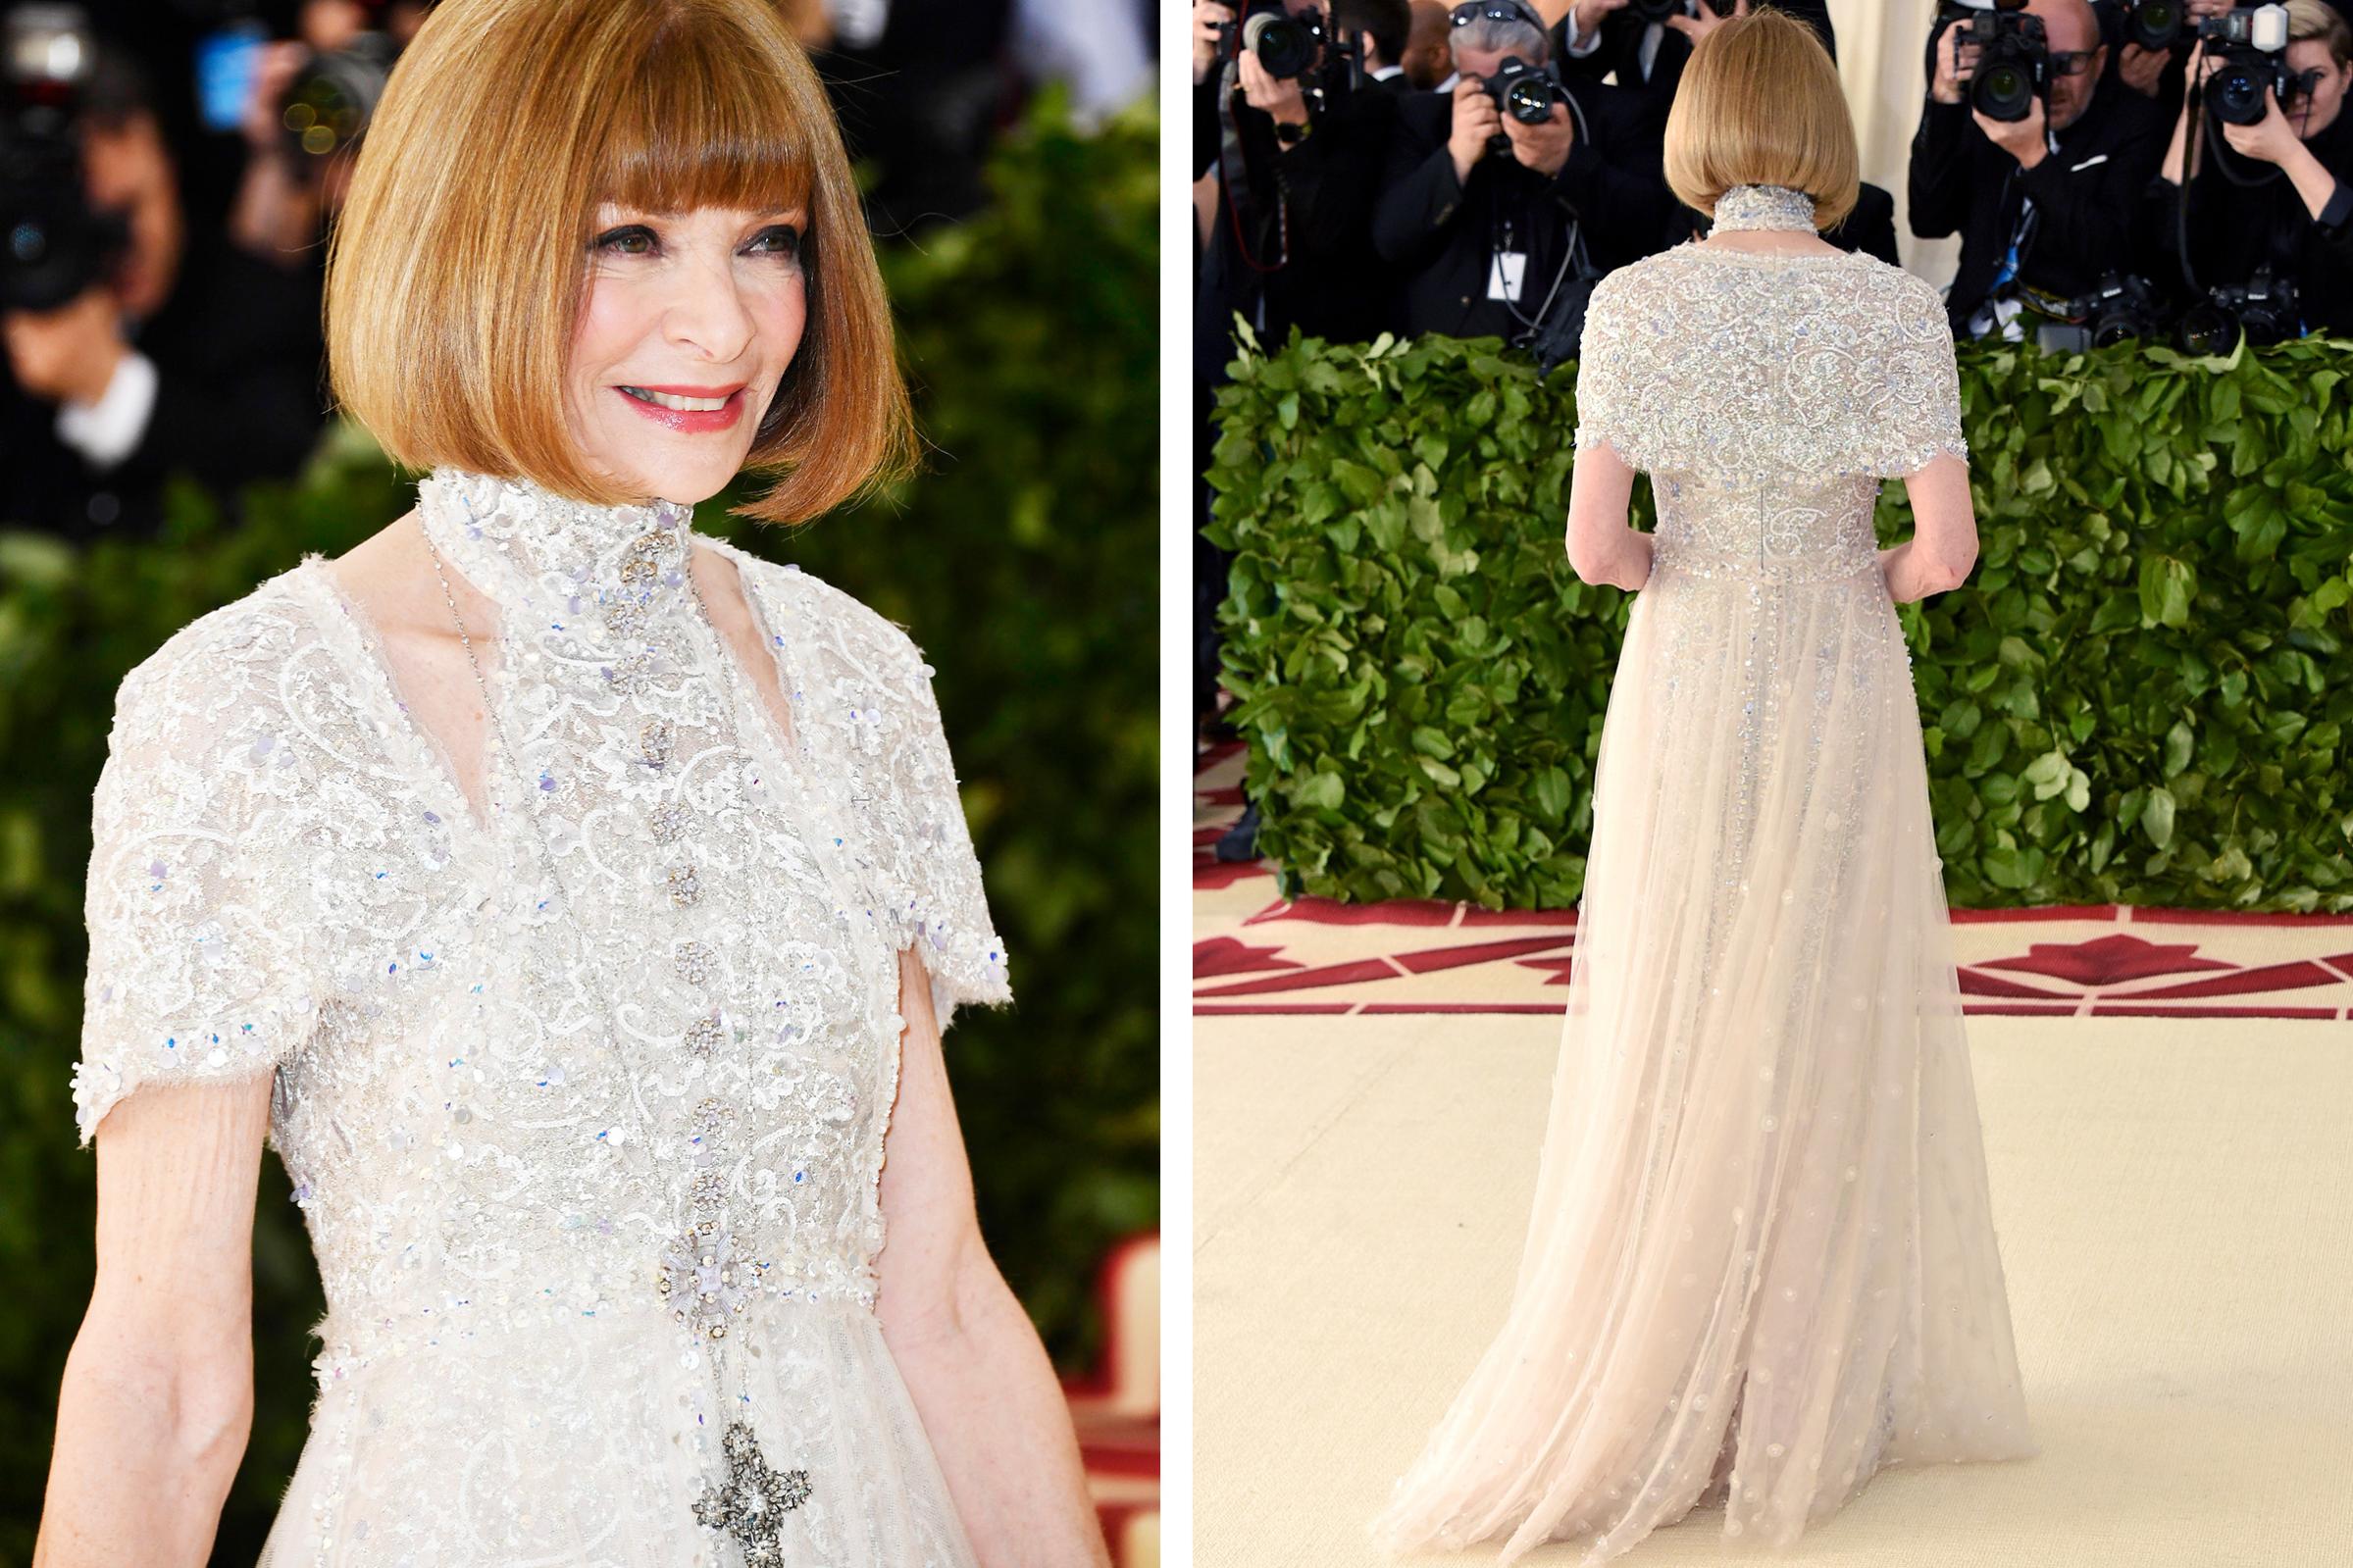 Anna Wintour attends the 2018 Met Gala